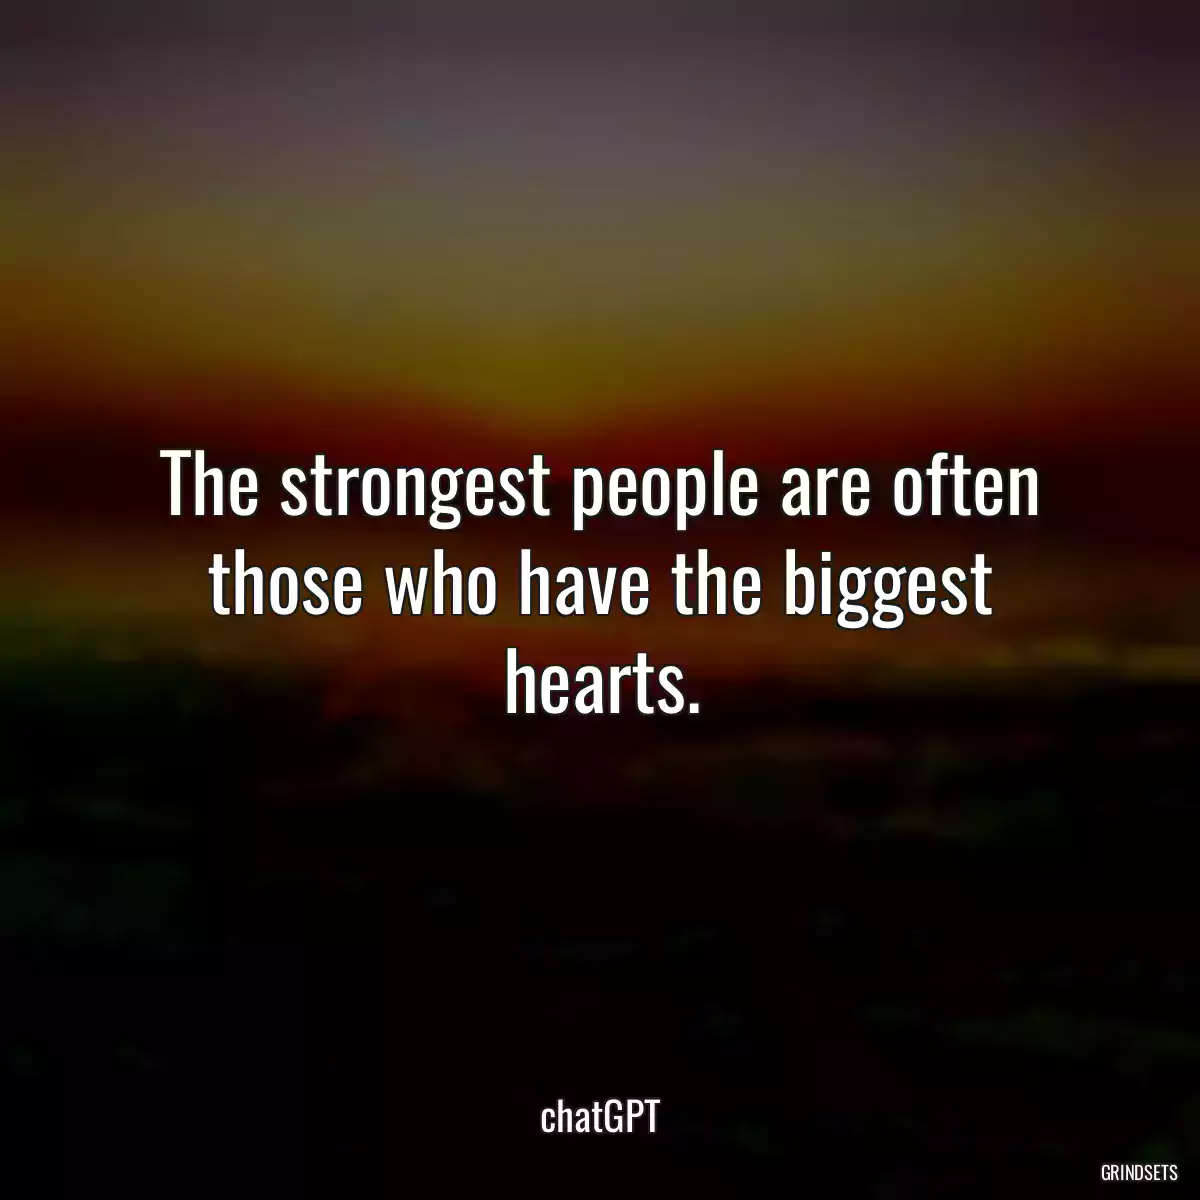 The strongest people are often those who have the biggest hearts.